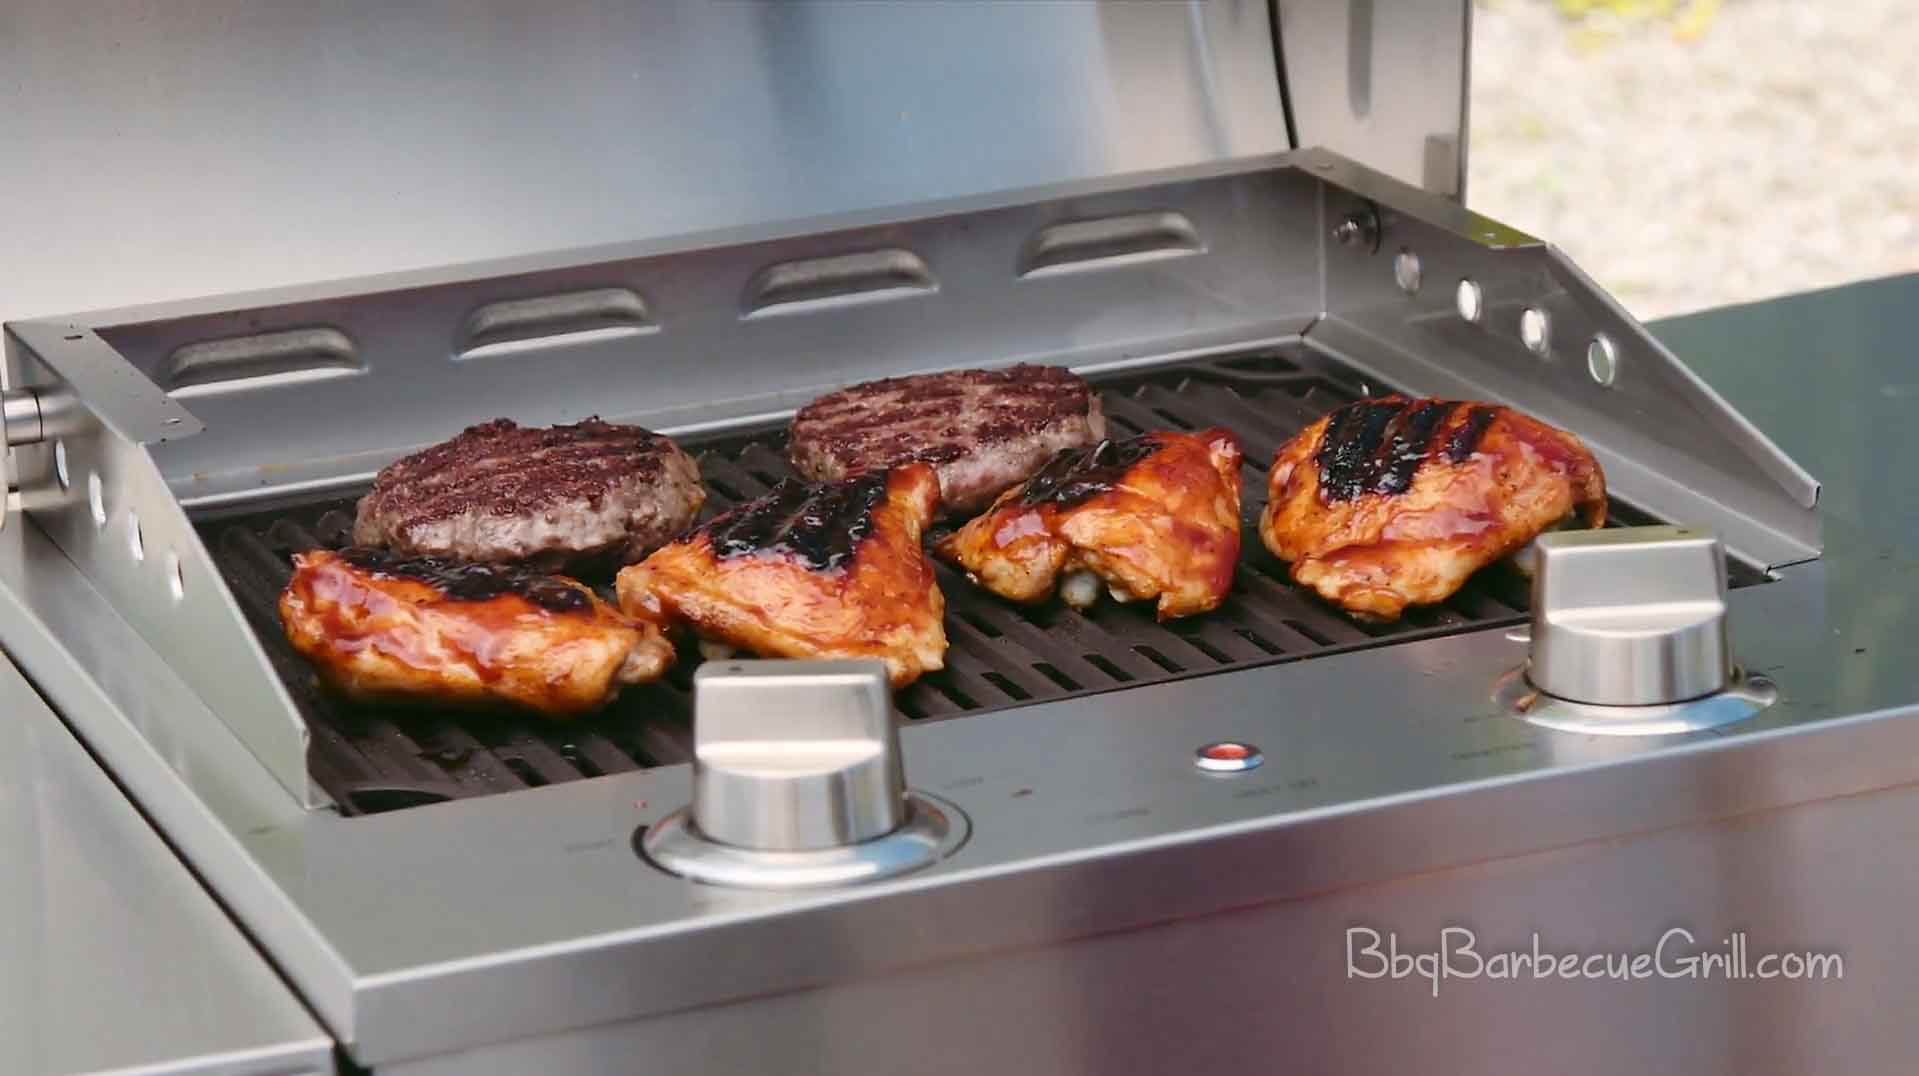 Best Electric Grills 2021 What's the Best Built In Electric Grill in 2020?   BBQ, Grill